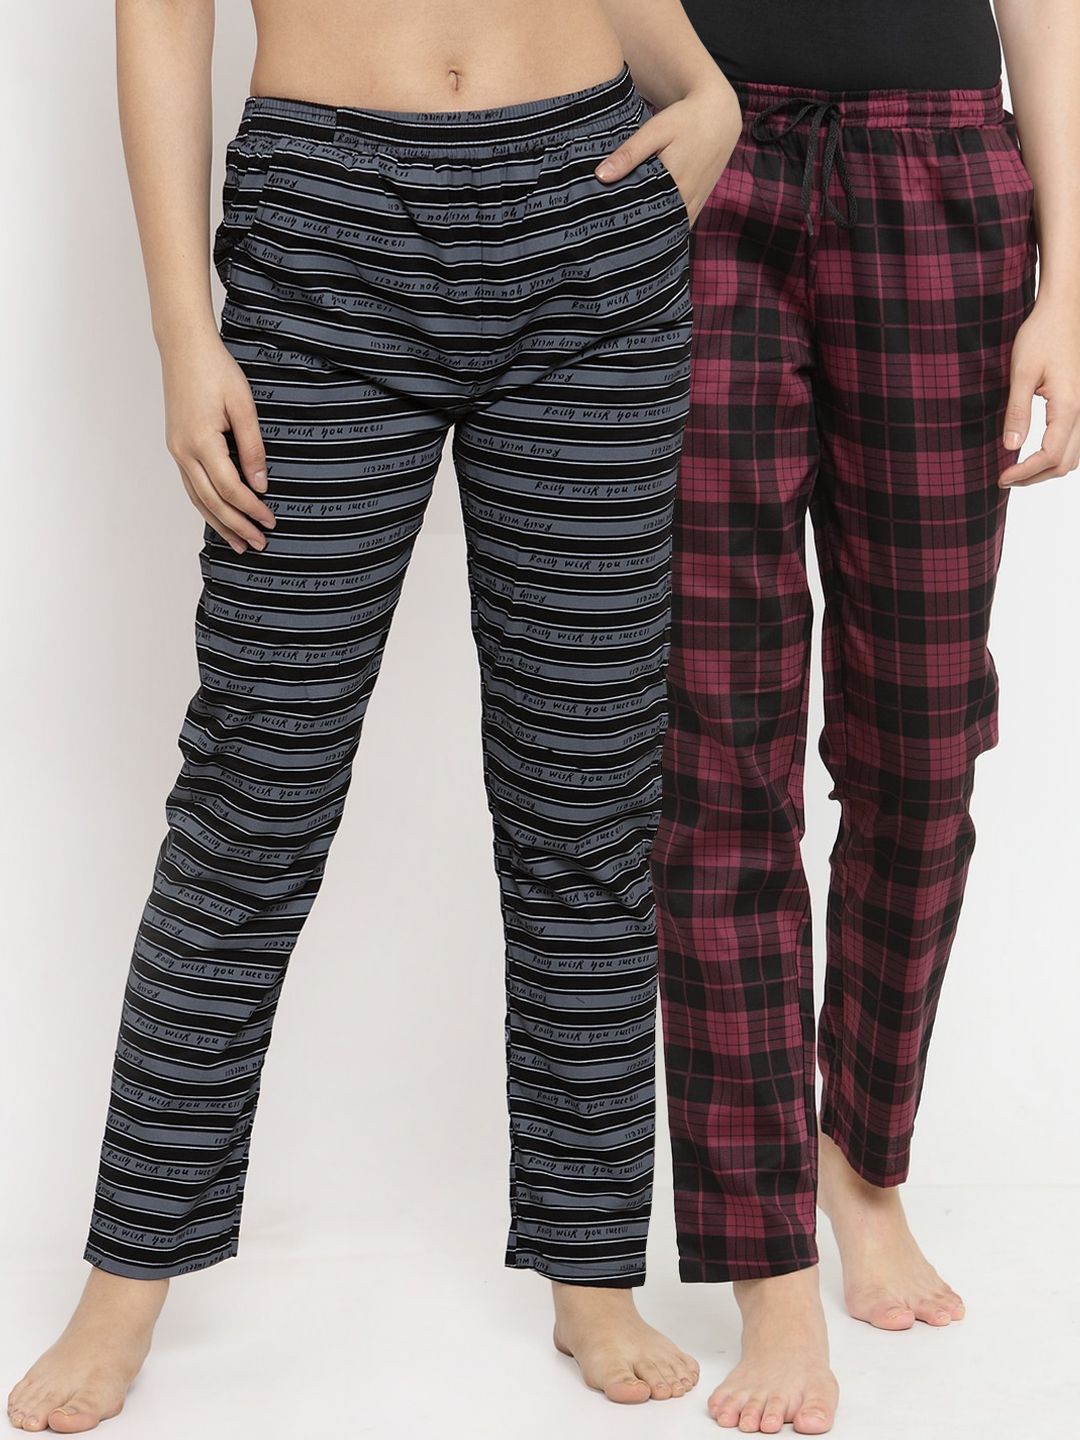 Claura Women Pack Of 2 Black & Pink Printed Cotton Lounge Pants Price in India